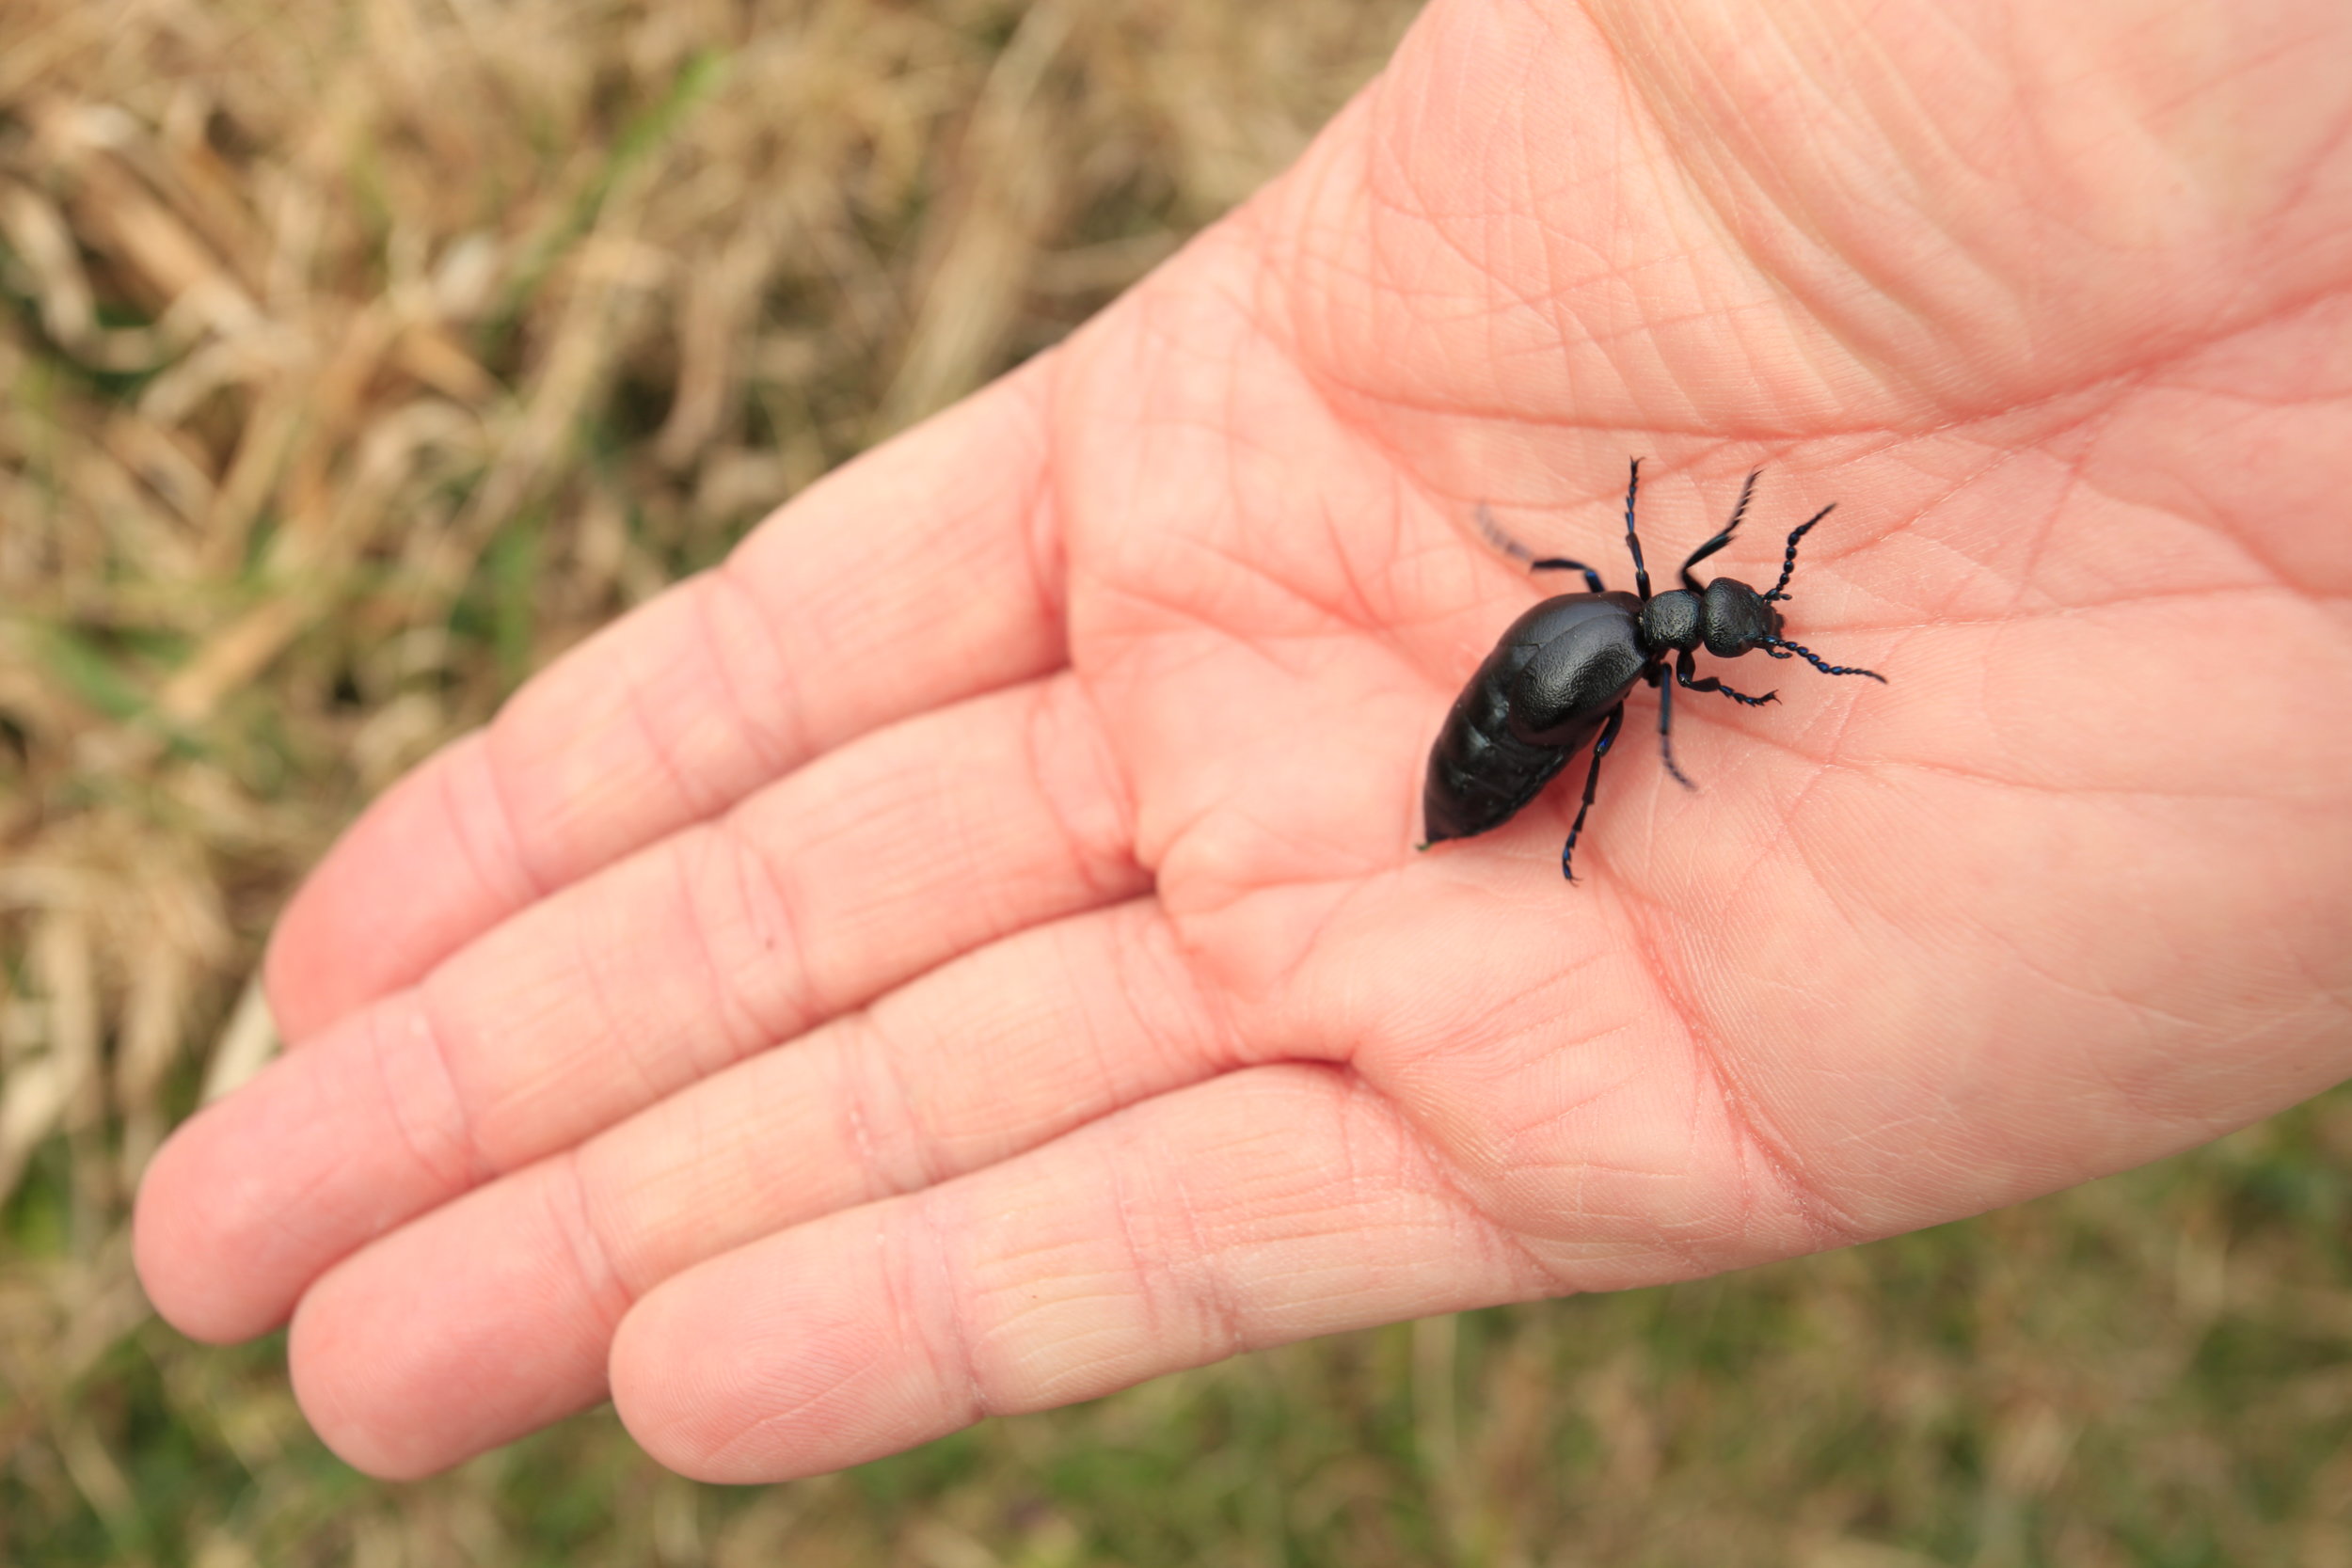 148Oil Beetle Overton Cliff area Heading for Rosssili South Wales Gower.jpg